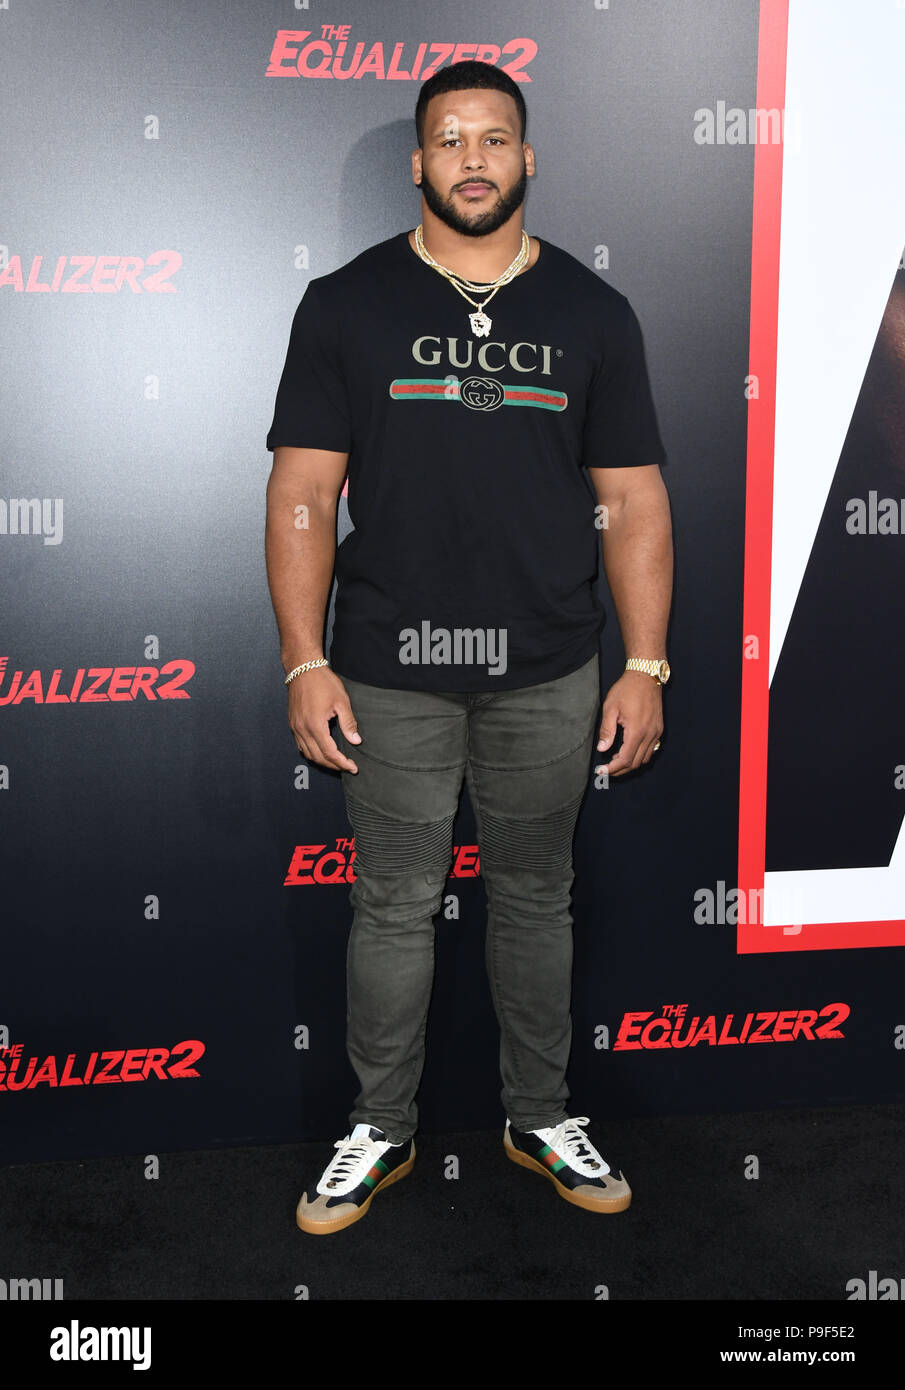 July 17, 2018 - Hollywood, CA, U.S. - 17 July 2018 - Hollywood , California - Aaron Donald. ''The Equalizer 2'' Los Angeles Premiere held at the TCL Chinese Theatre. Photo Credit: Birdie Thompson/AdMedia (Credit Image: © Birdie Thompson/AdMedia via ZUMA Wire) Stock Photo